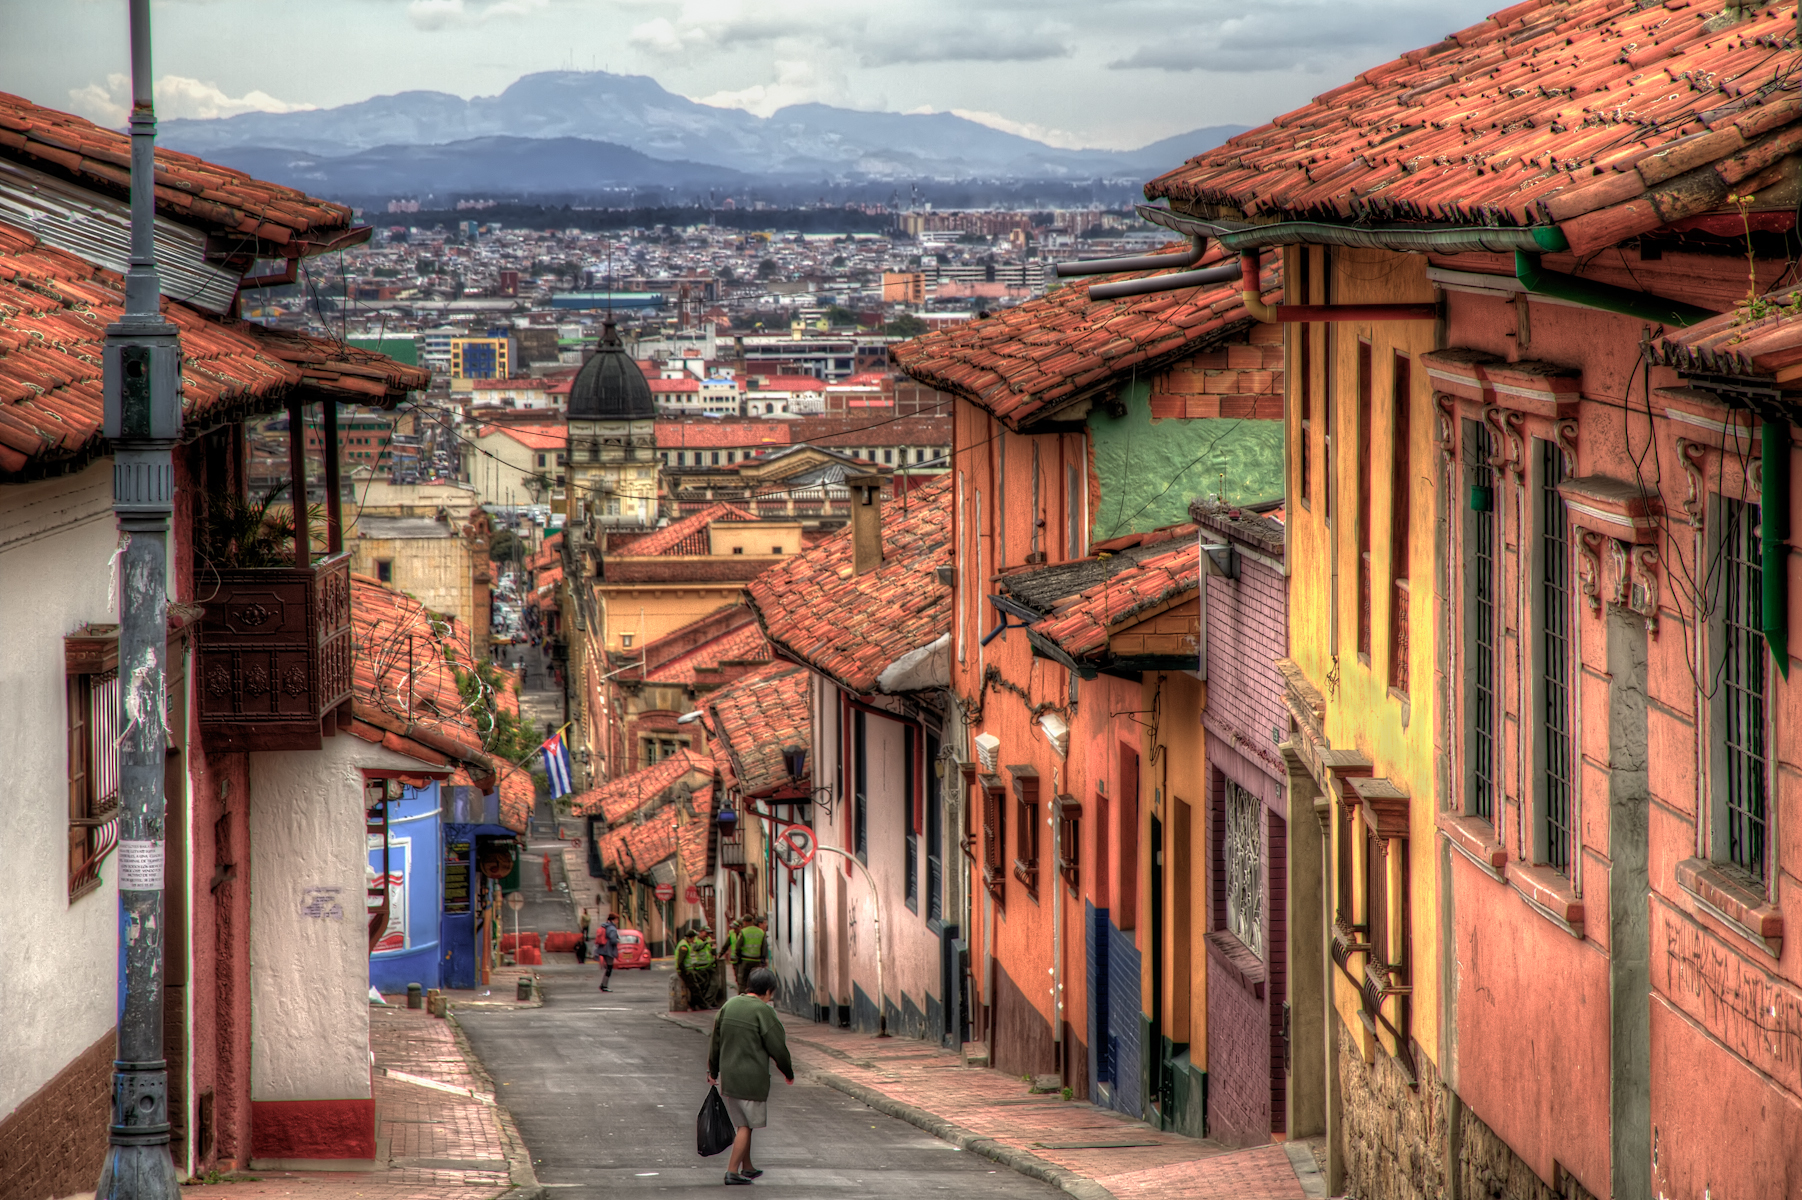 View of Bogota from La Candelaria. Lots of interesting narrow streets to walk around.